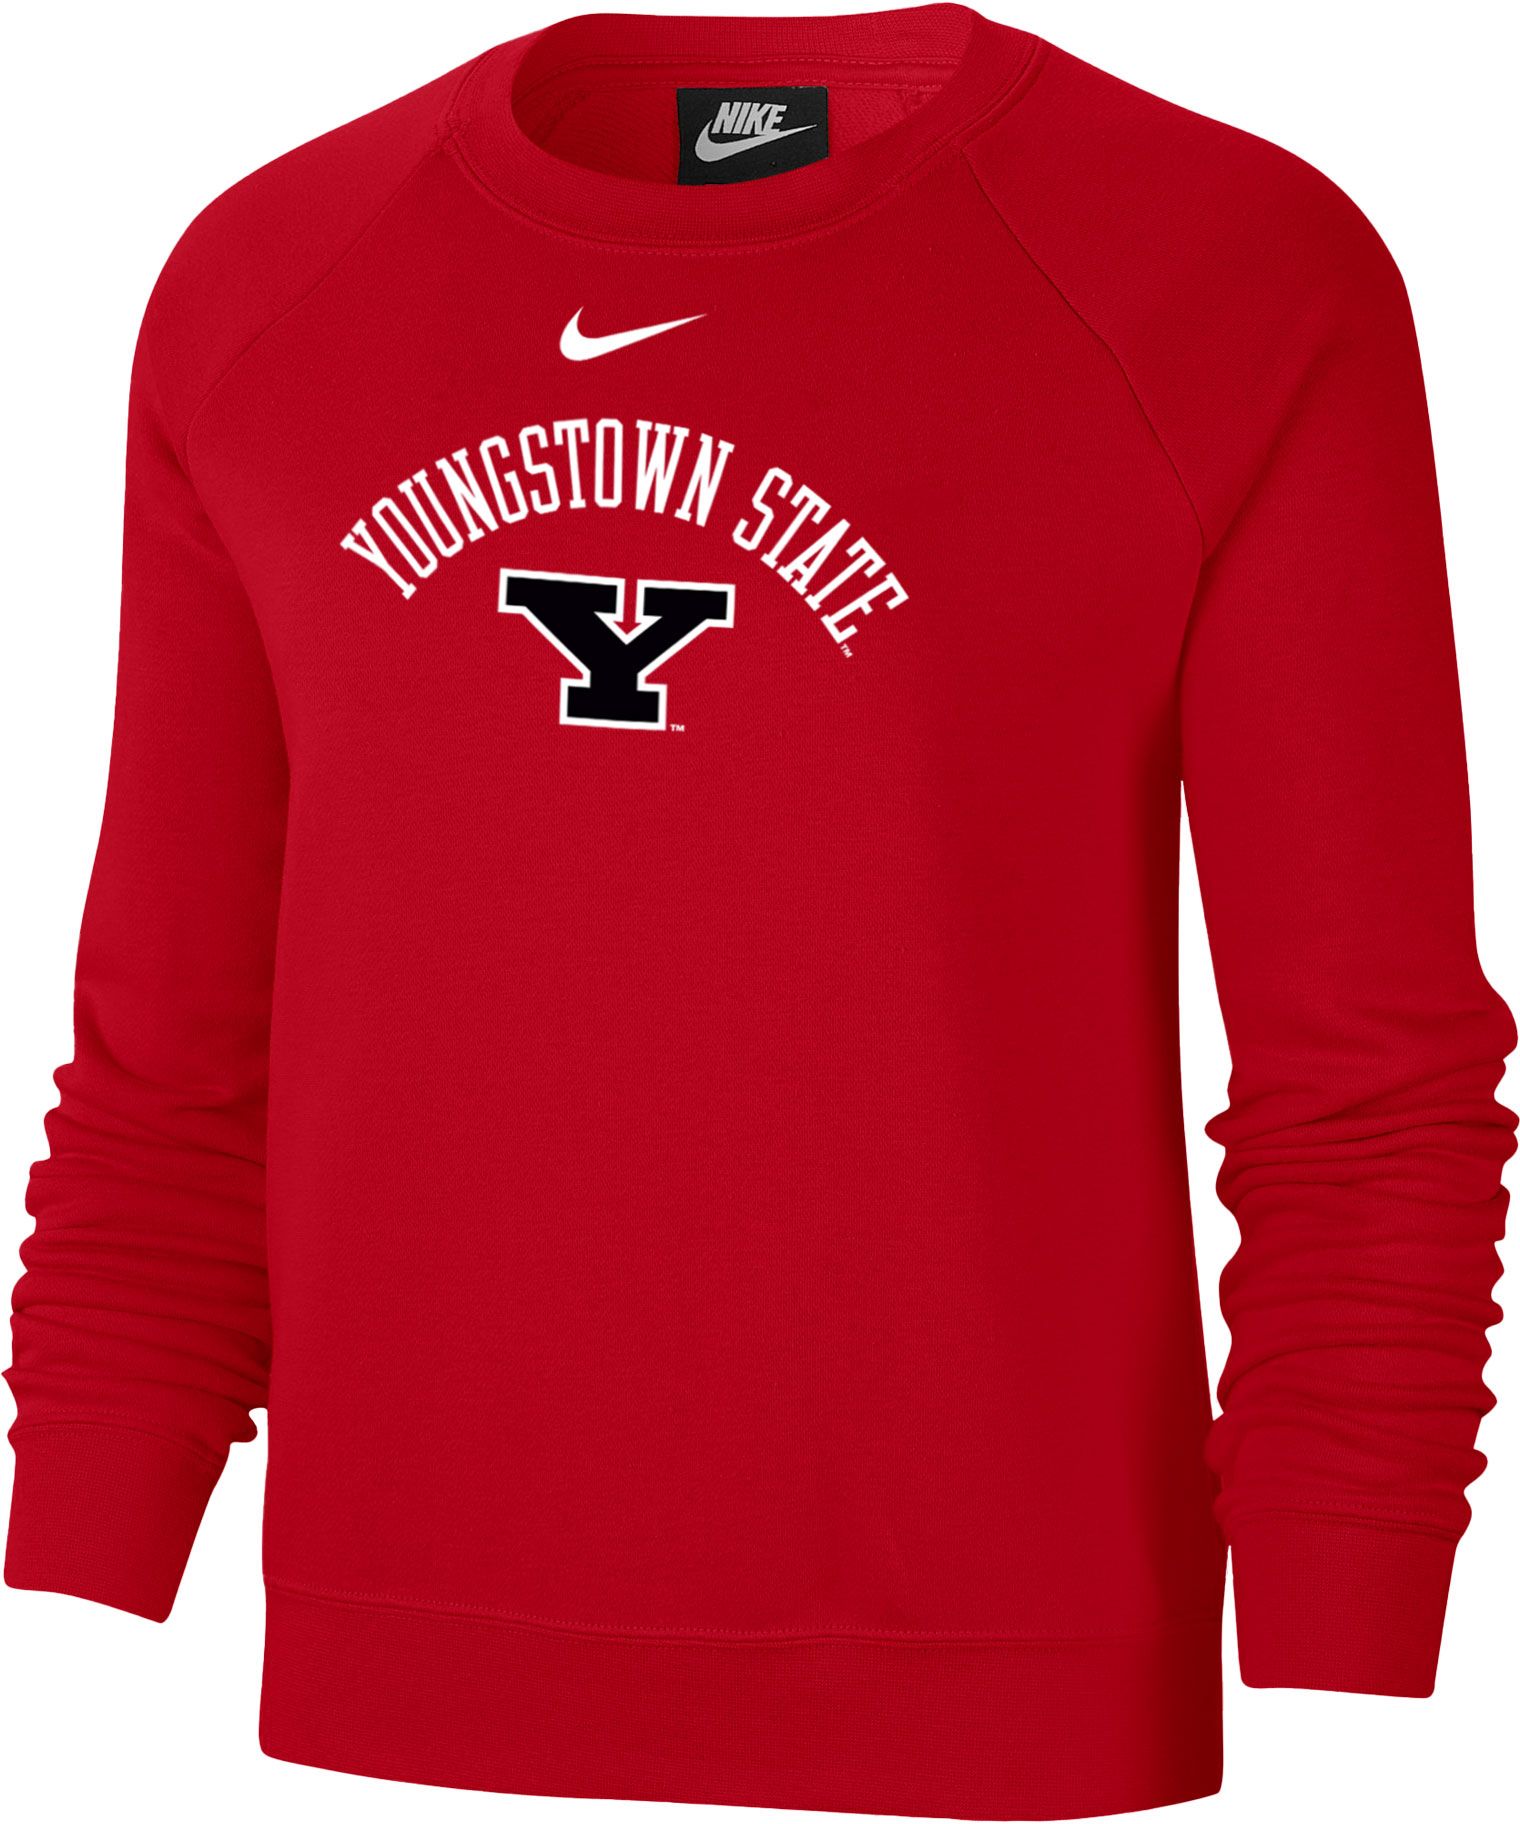 Nike Women's Youngstown State Penguins Red Varsity Arch Logo Crew Neck Sweatshirt